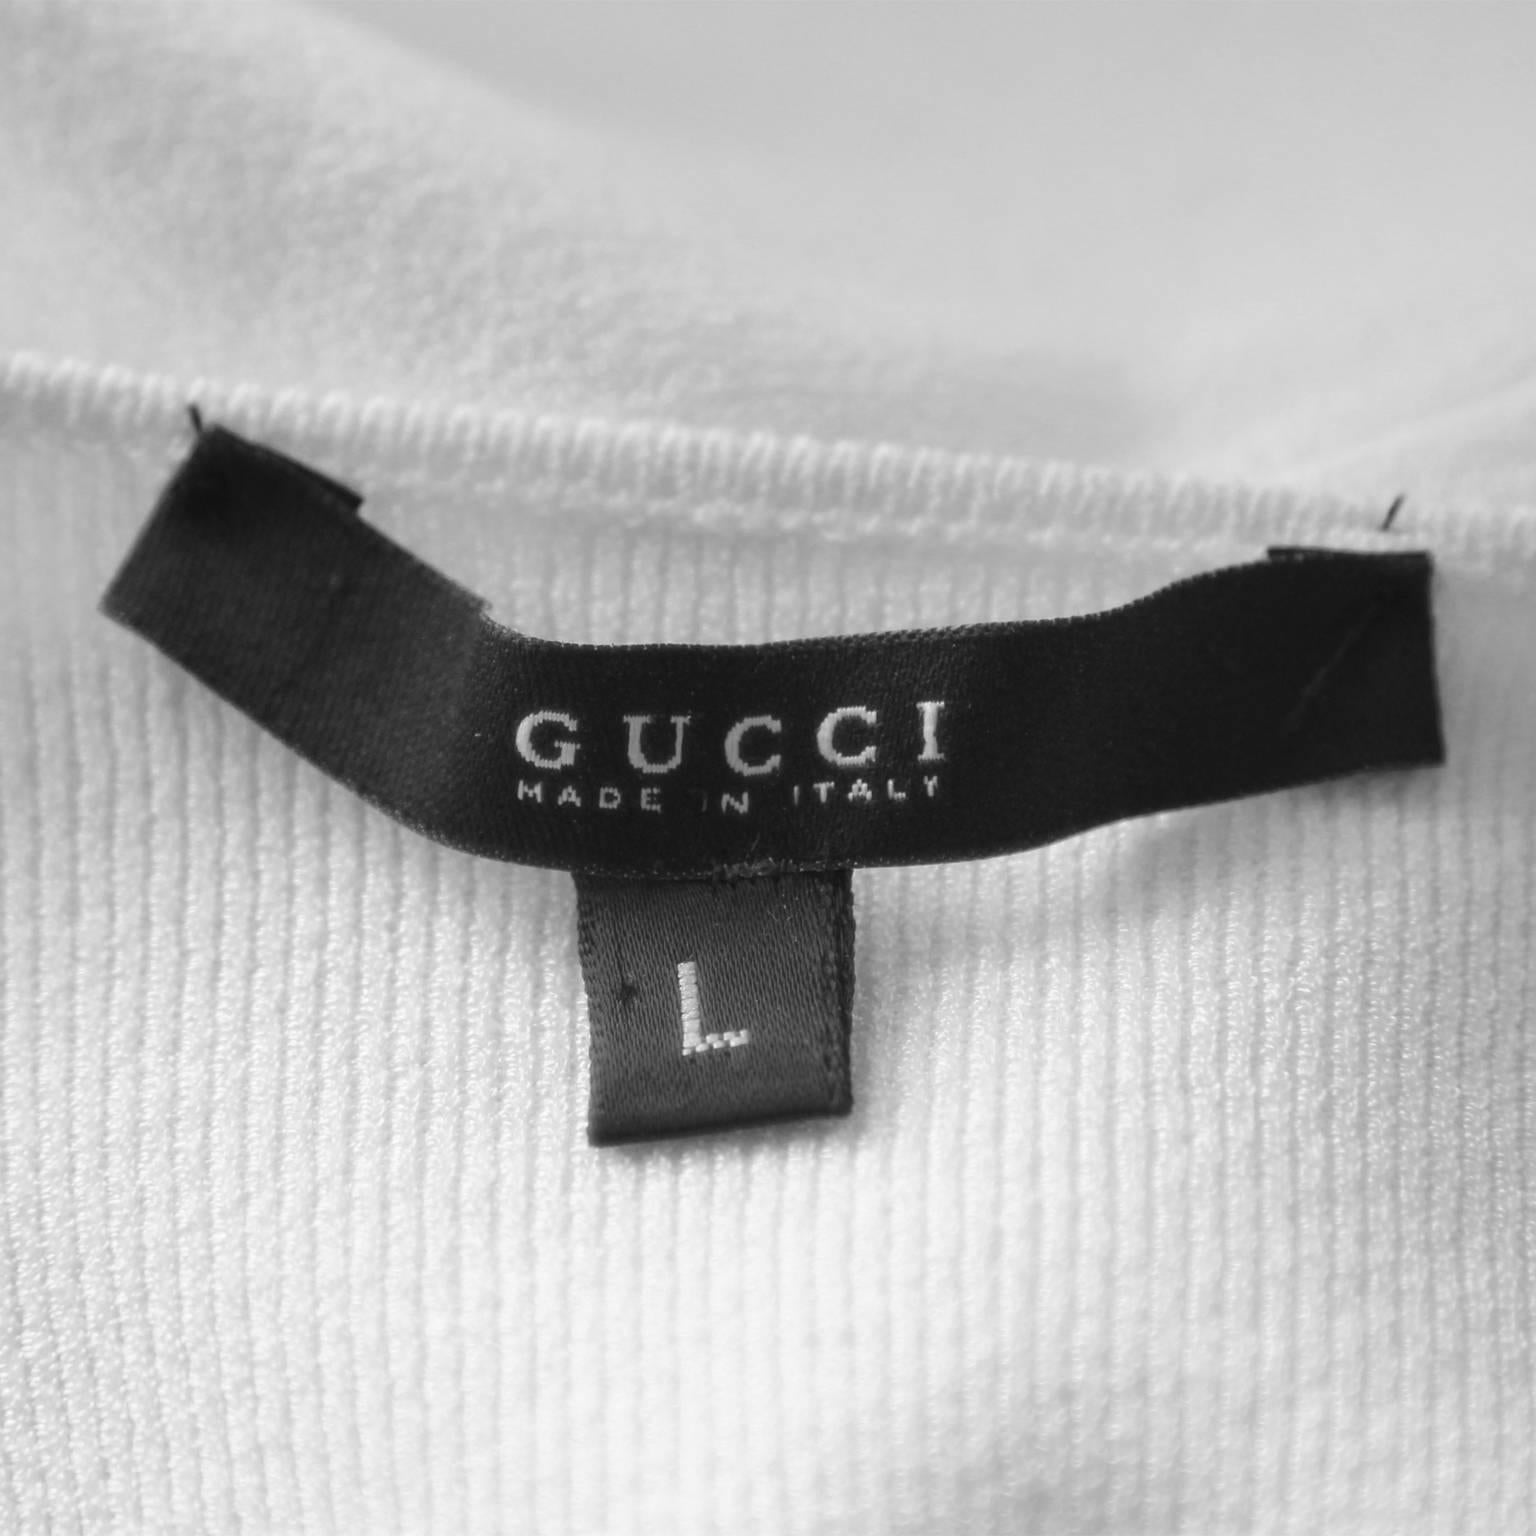 The Most Gorgeous Tom Ford For Gucci FW 2003 White Cold-Shoulder Sweater! L In Good Condition For Sale In Melbourne, AU